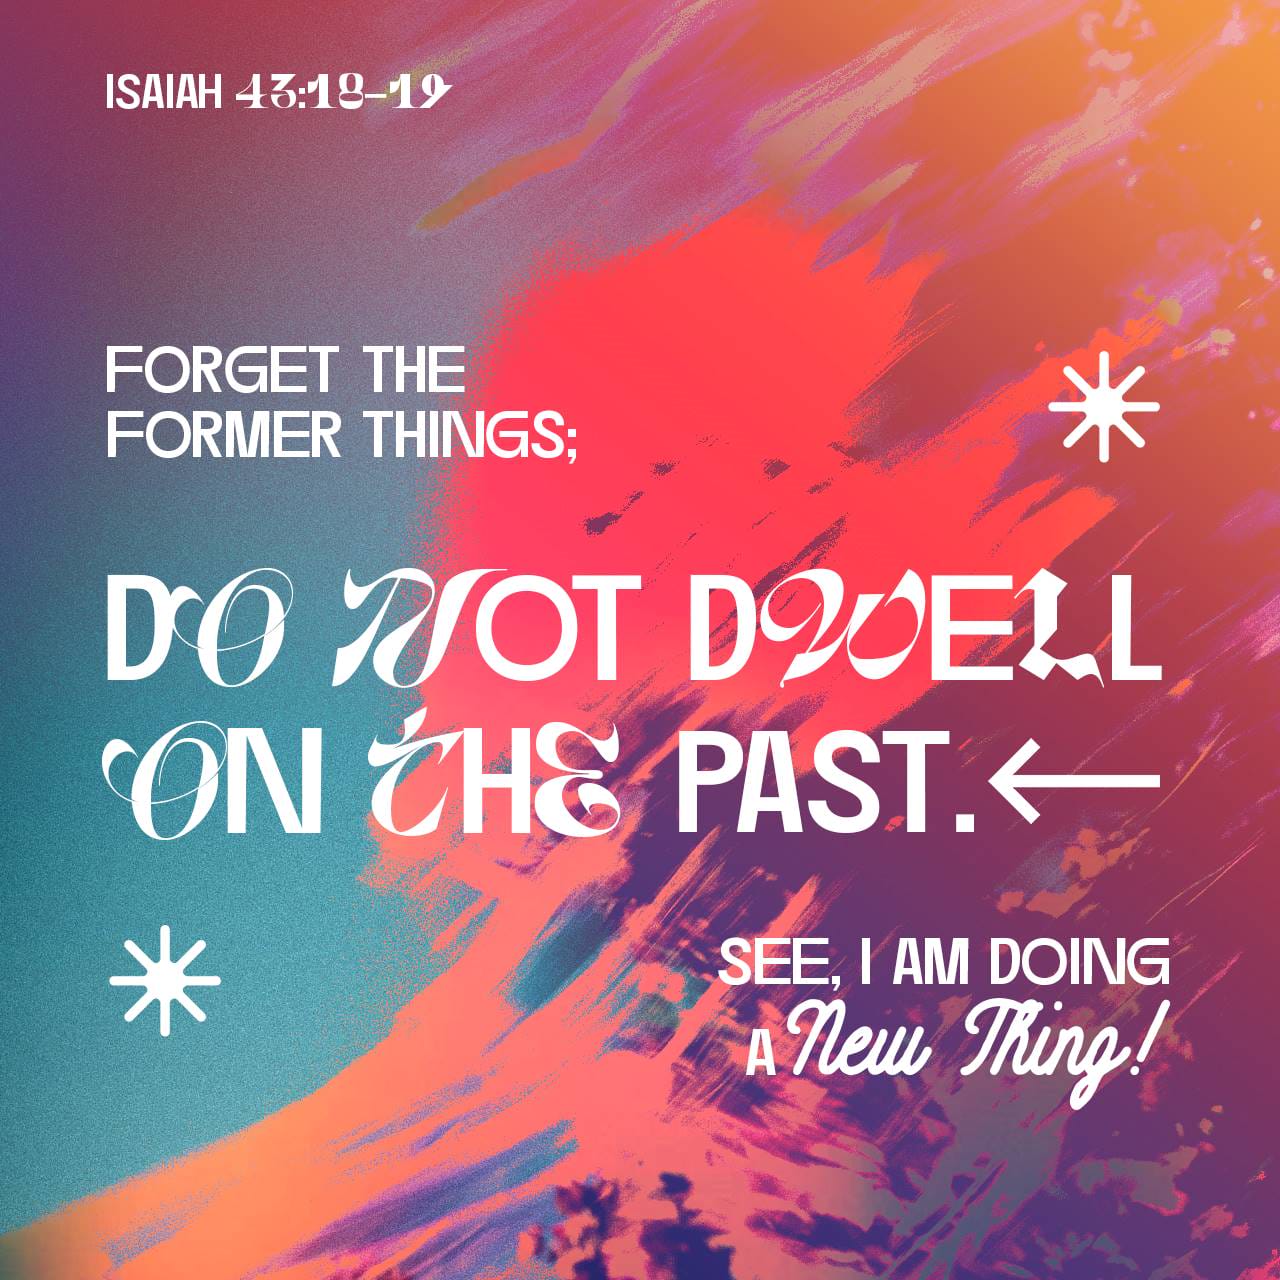 Isaiah 43:18-19 The LORD says, “Forget what happened before, and do not  think about the past. Look at the new thing I am going to do. It is already  happening. Don't you